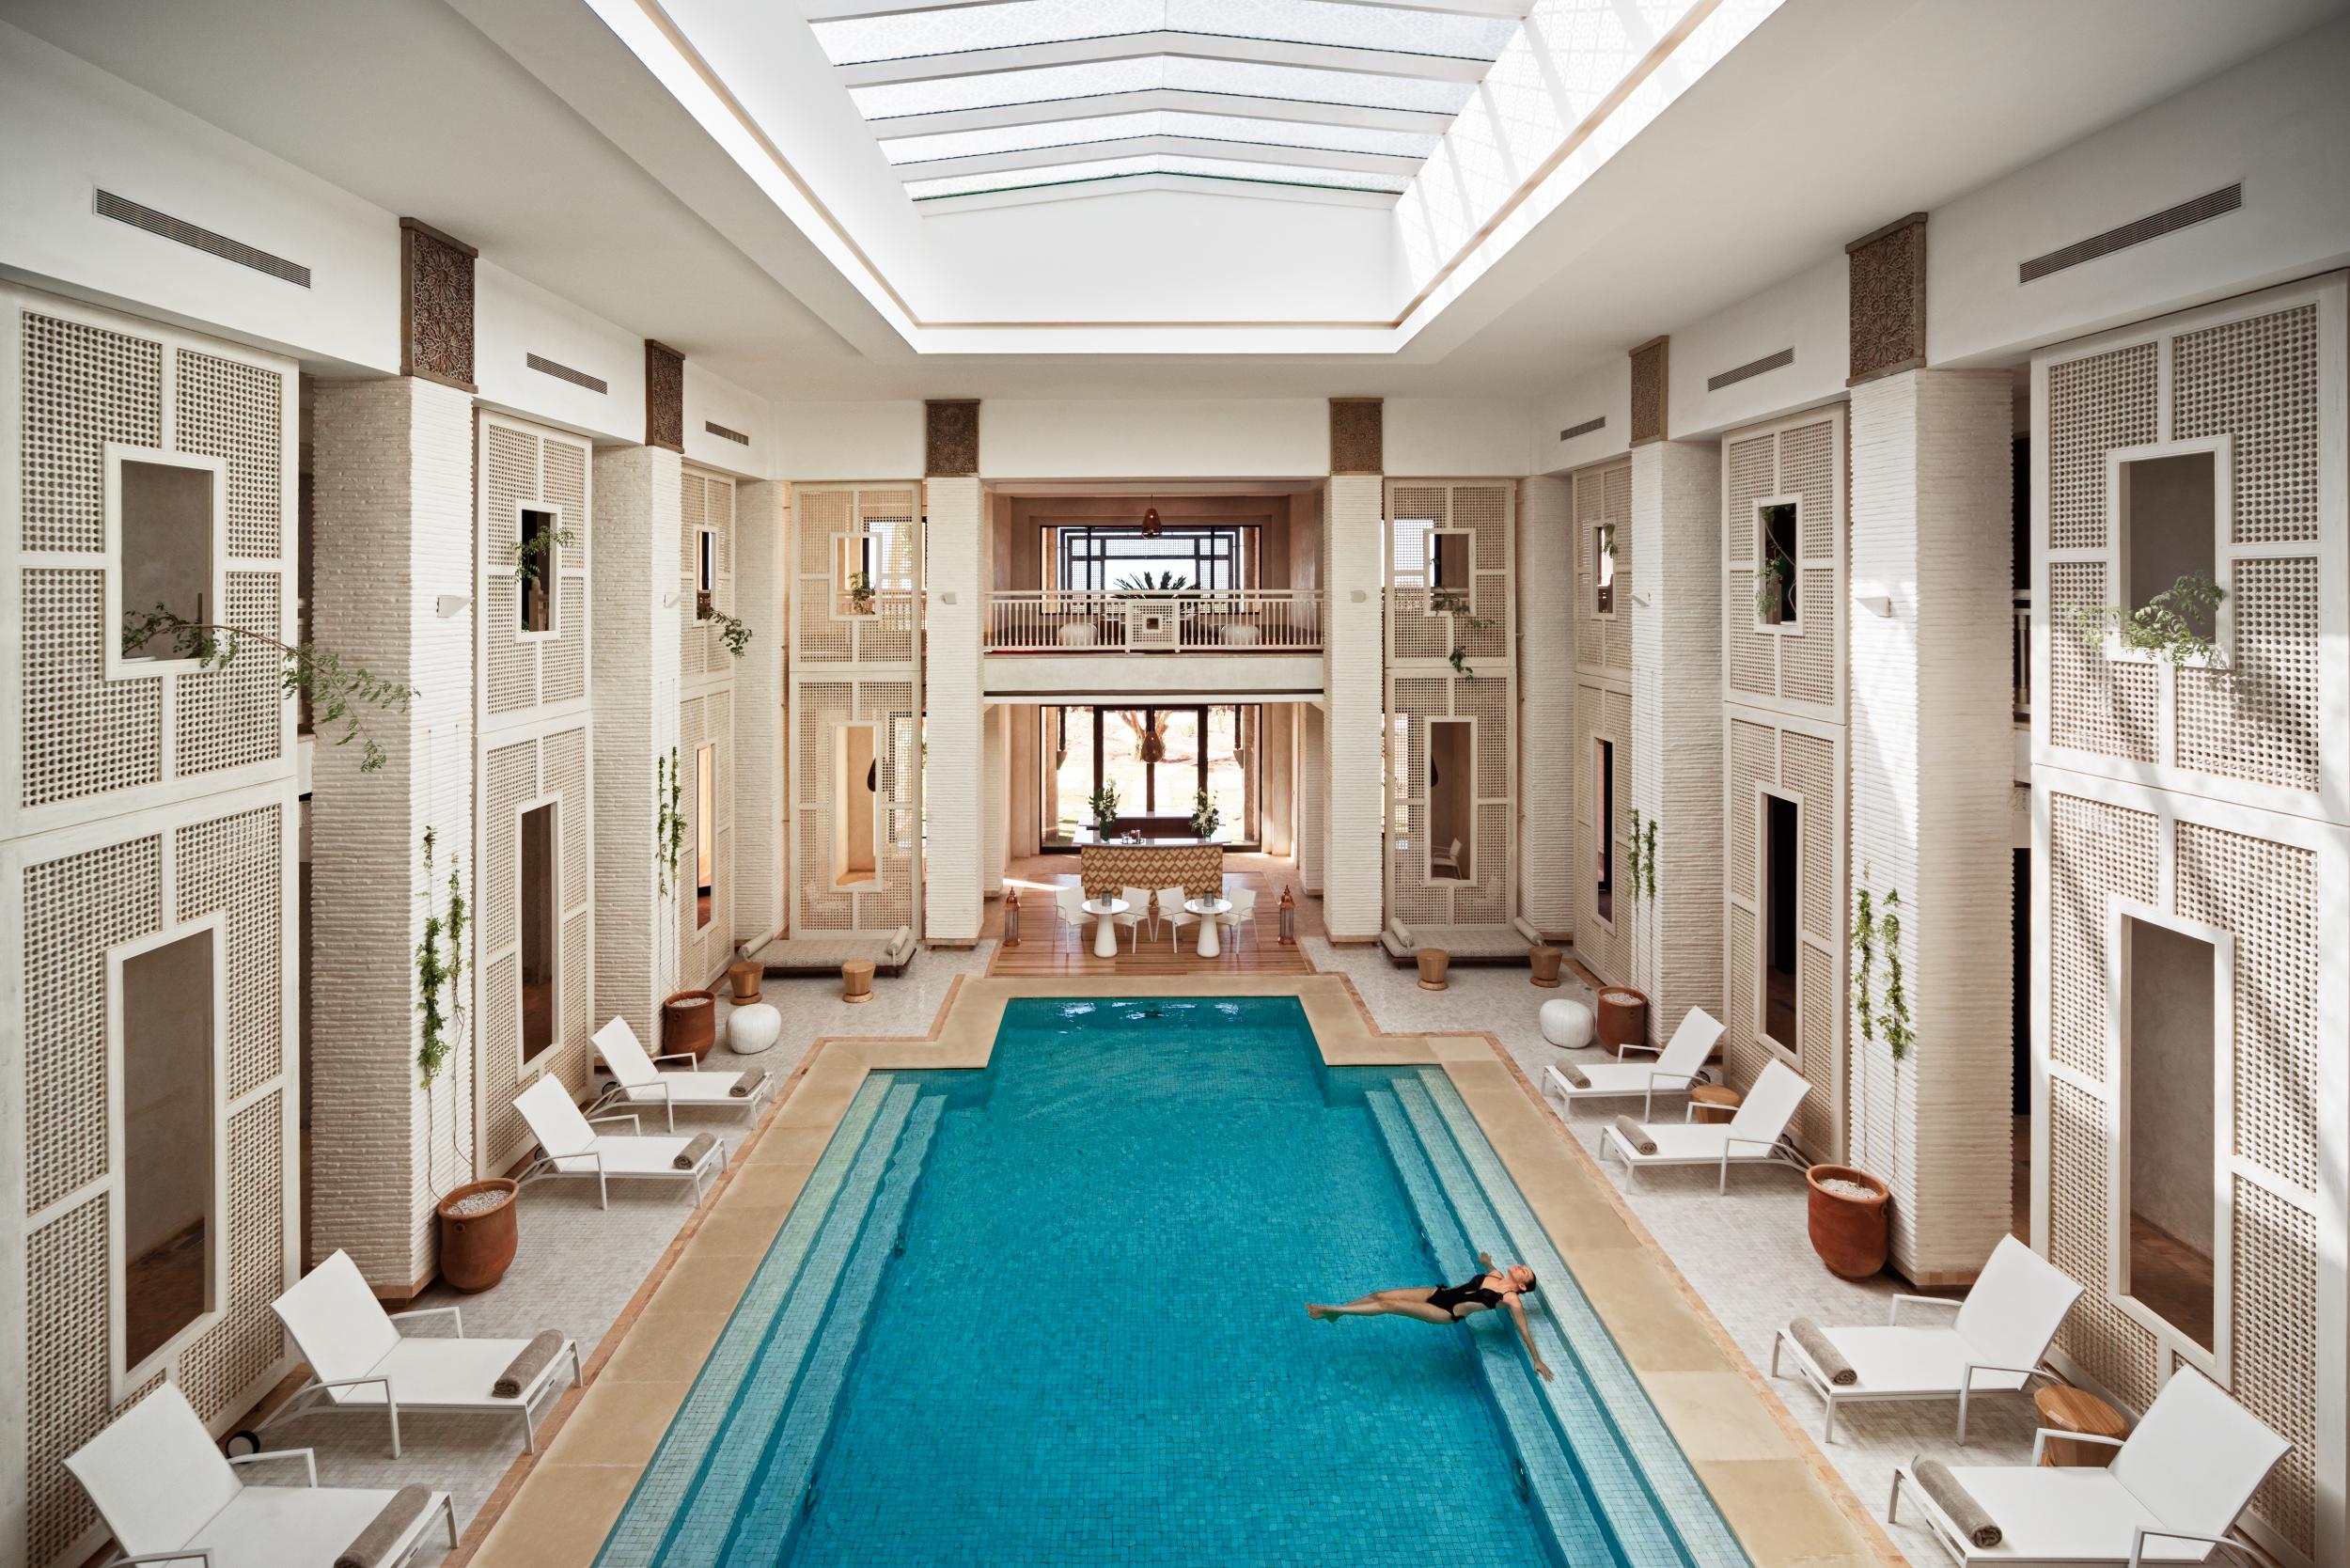 An extensive spa is free for guests to use